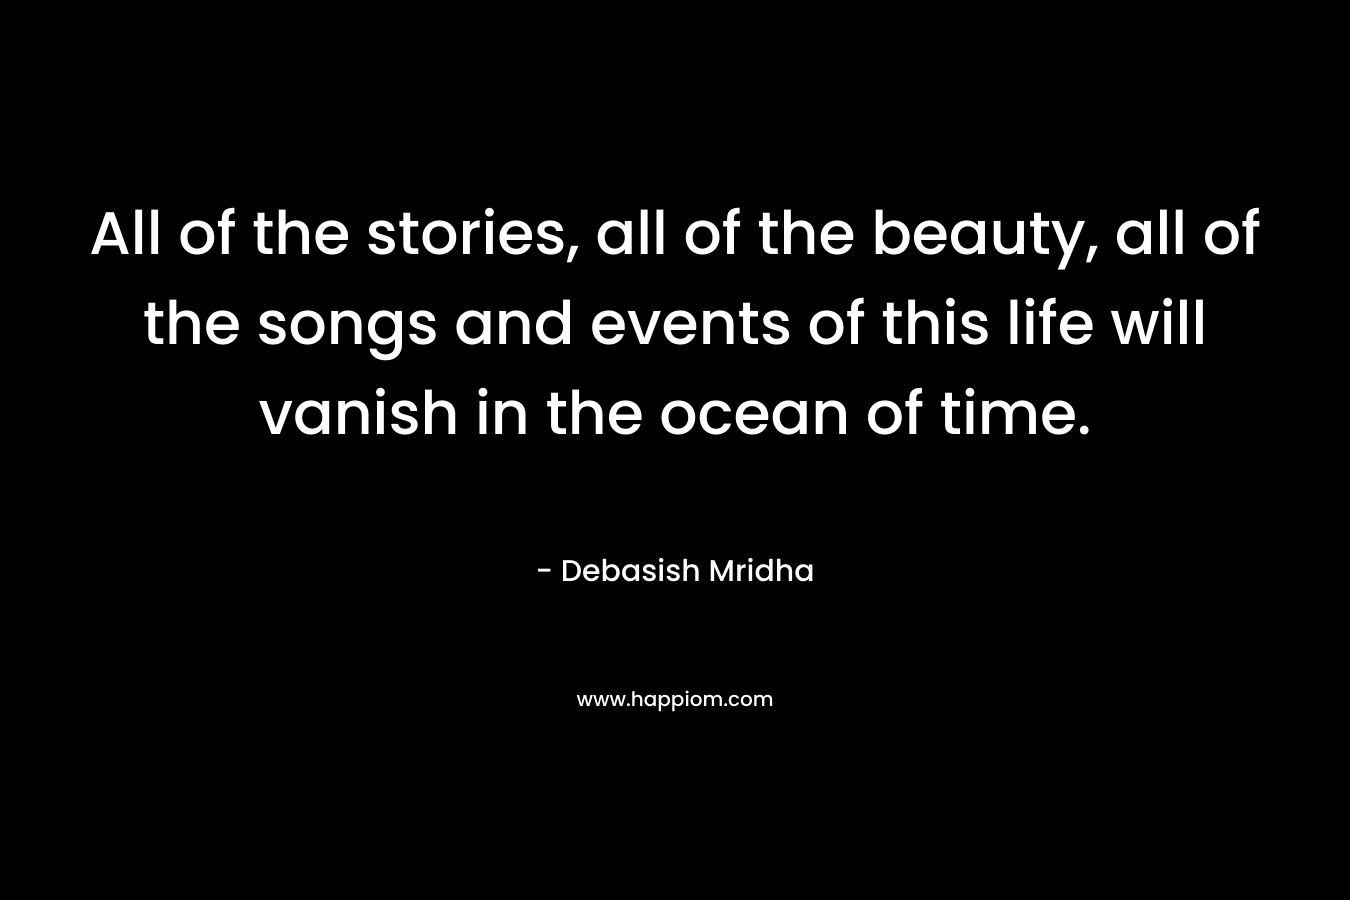 All of the stories, all of the beauty, all of the songs and events of this life will vanish in the ocean of time.